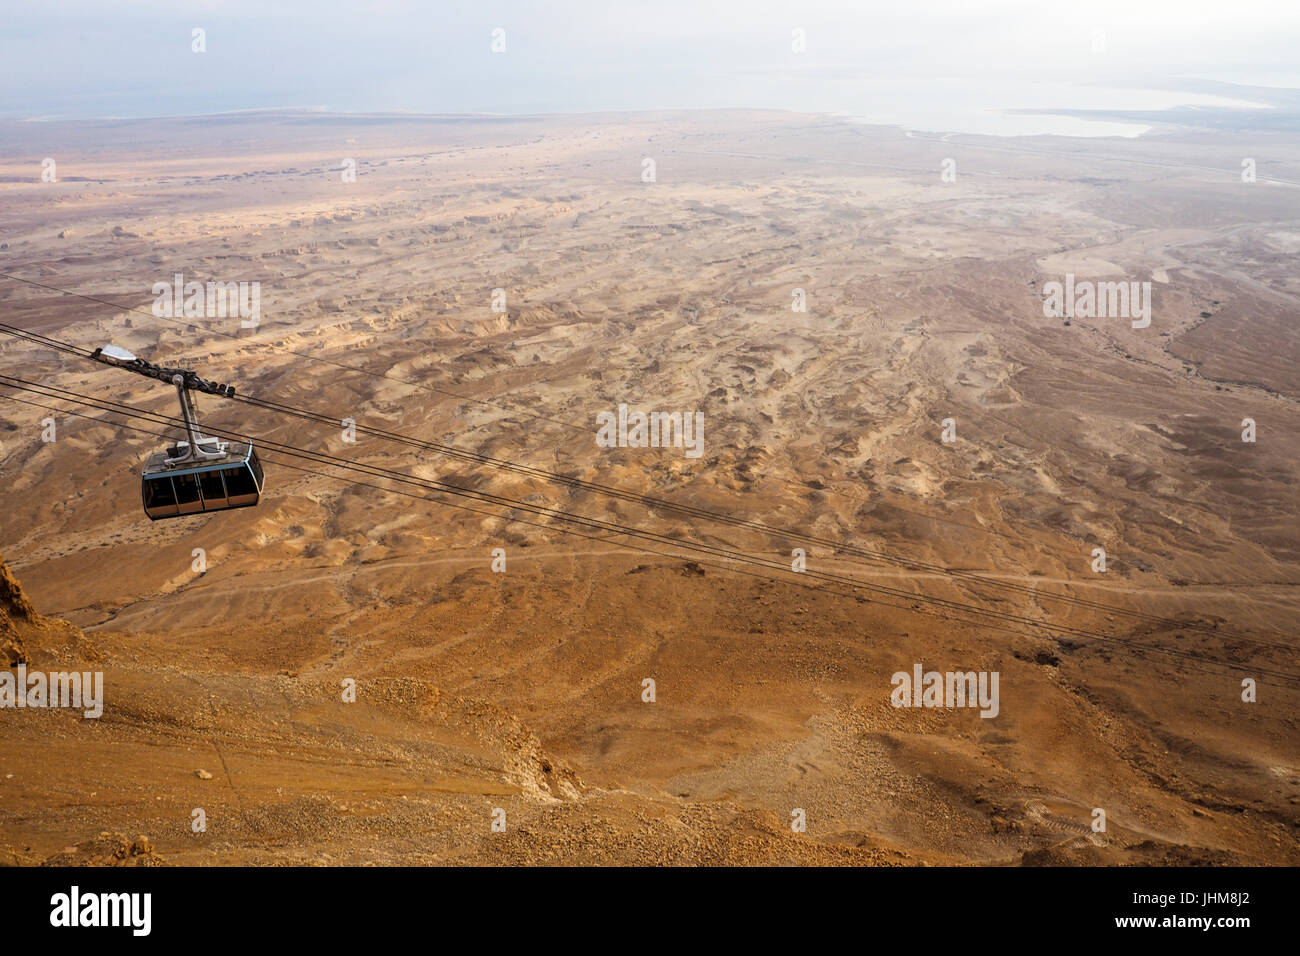 The Masada cableway car descending from Mt Masada, and the Dead sea in the distance. Stock Photo